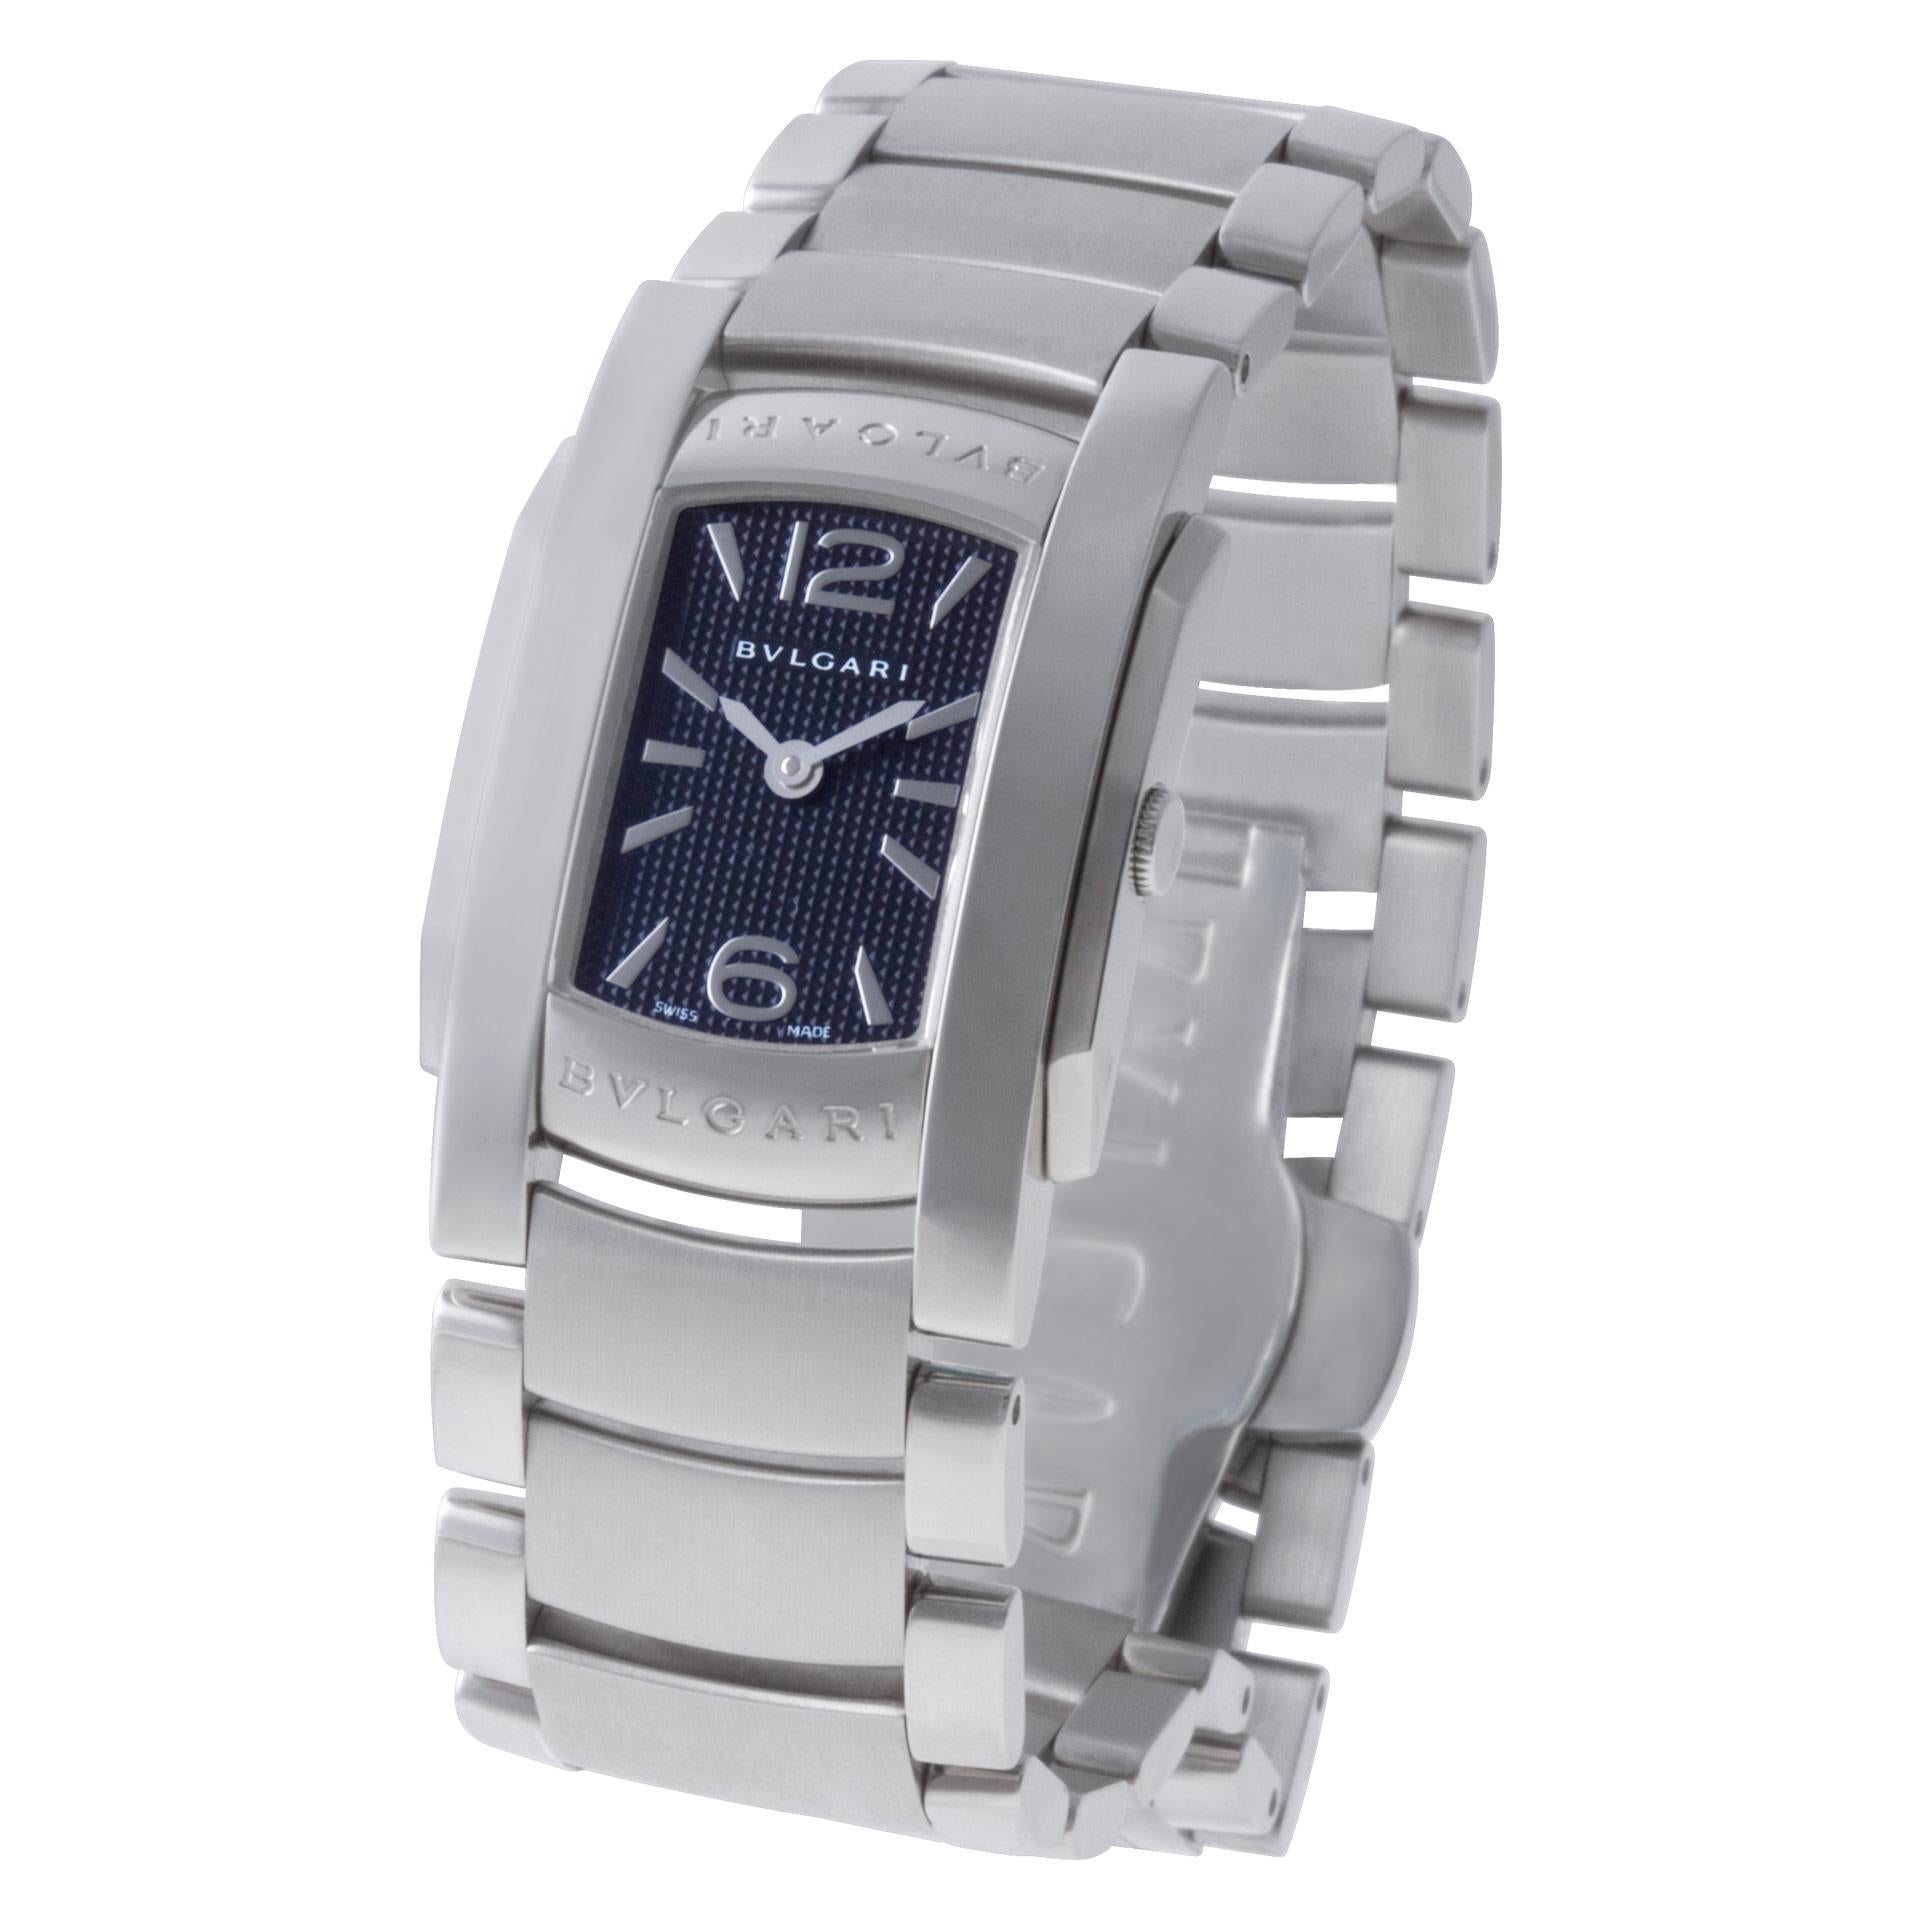 Ladies Bvlgari Assioma in stainless steel 23.5mm x 28mm case size. Quartz. With papers. Ref AA35S. Circa 2009. Fine Pre-owned Bvlgari / Bulgari Watch.

Certified preowned Classic Bvlgari Assioma AA35S watch is made out of Stainless steel on a